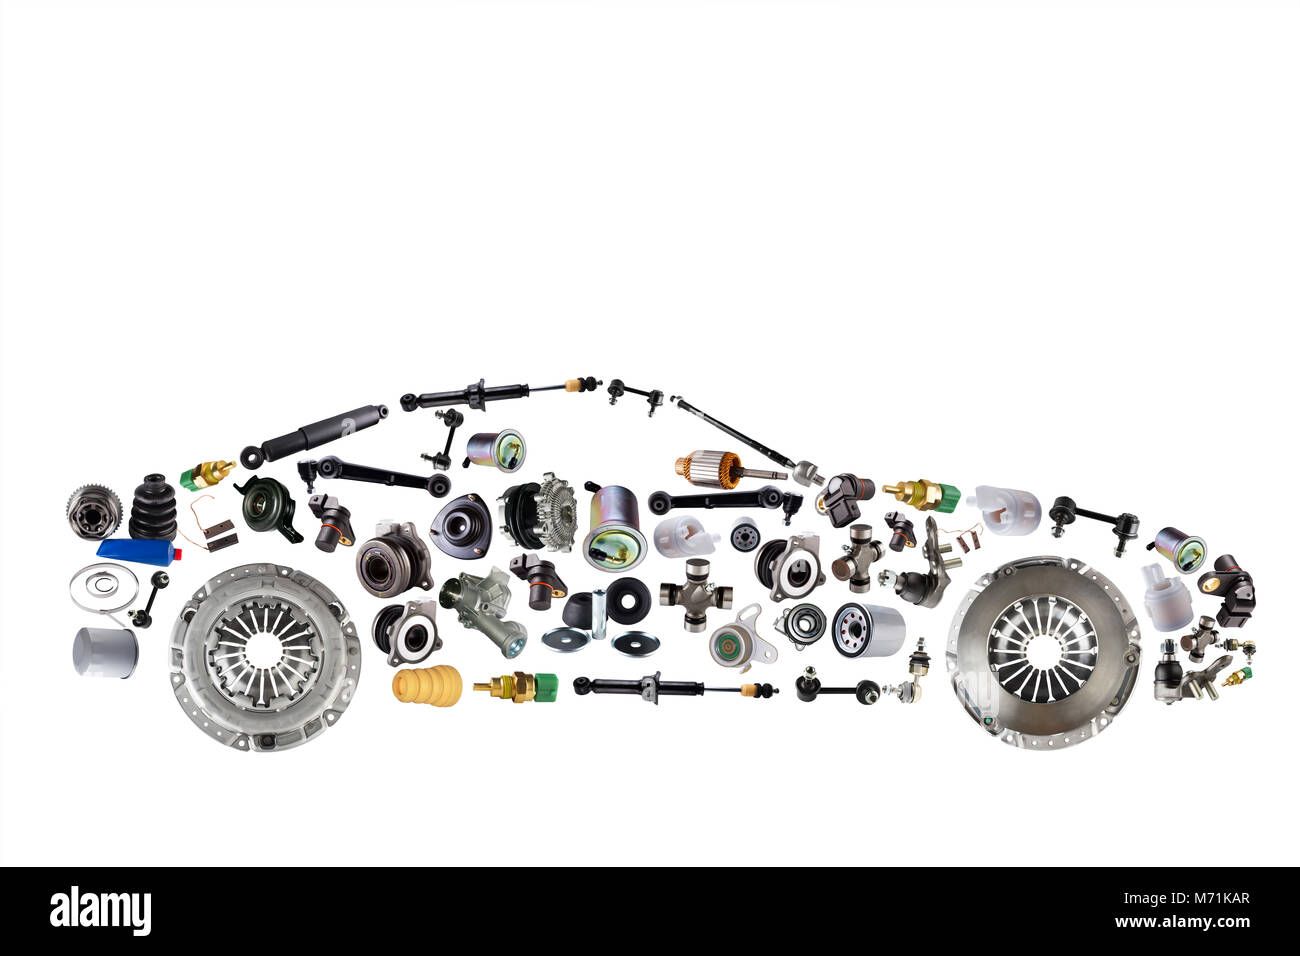 Auto Parts, Vehicle Parts, Car Accessories Isolated On A White Background.  Stock Photo, Picture and Royalty Free Image. Image 140363200., Auto  Accessories